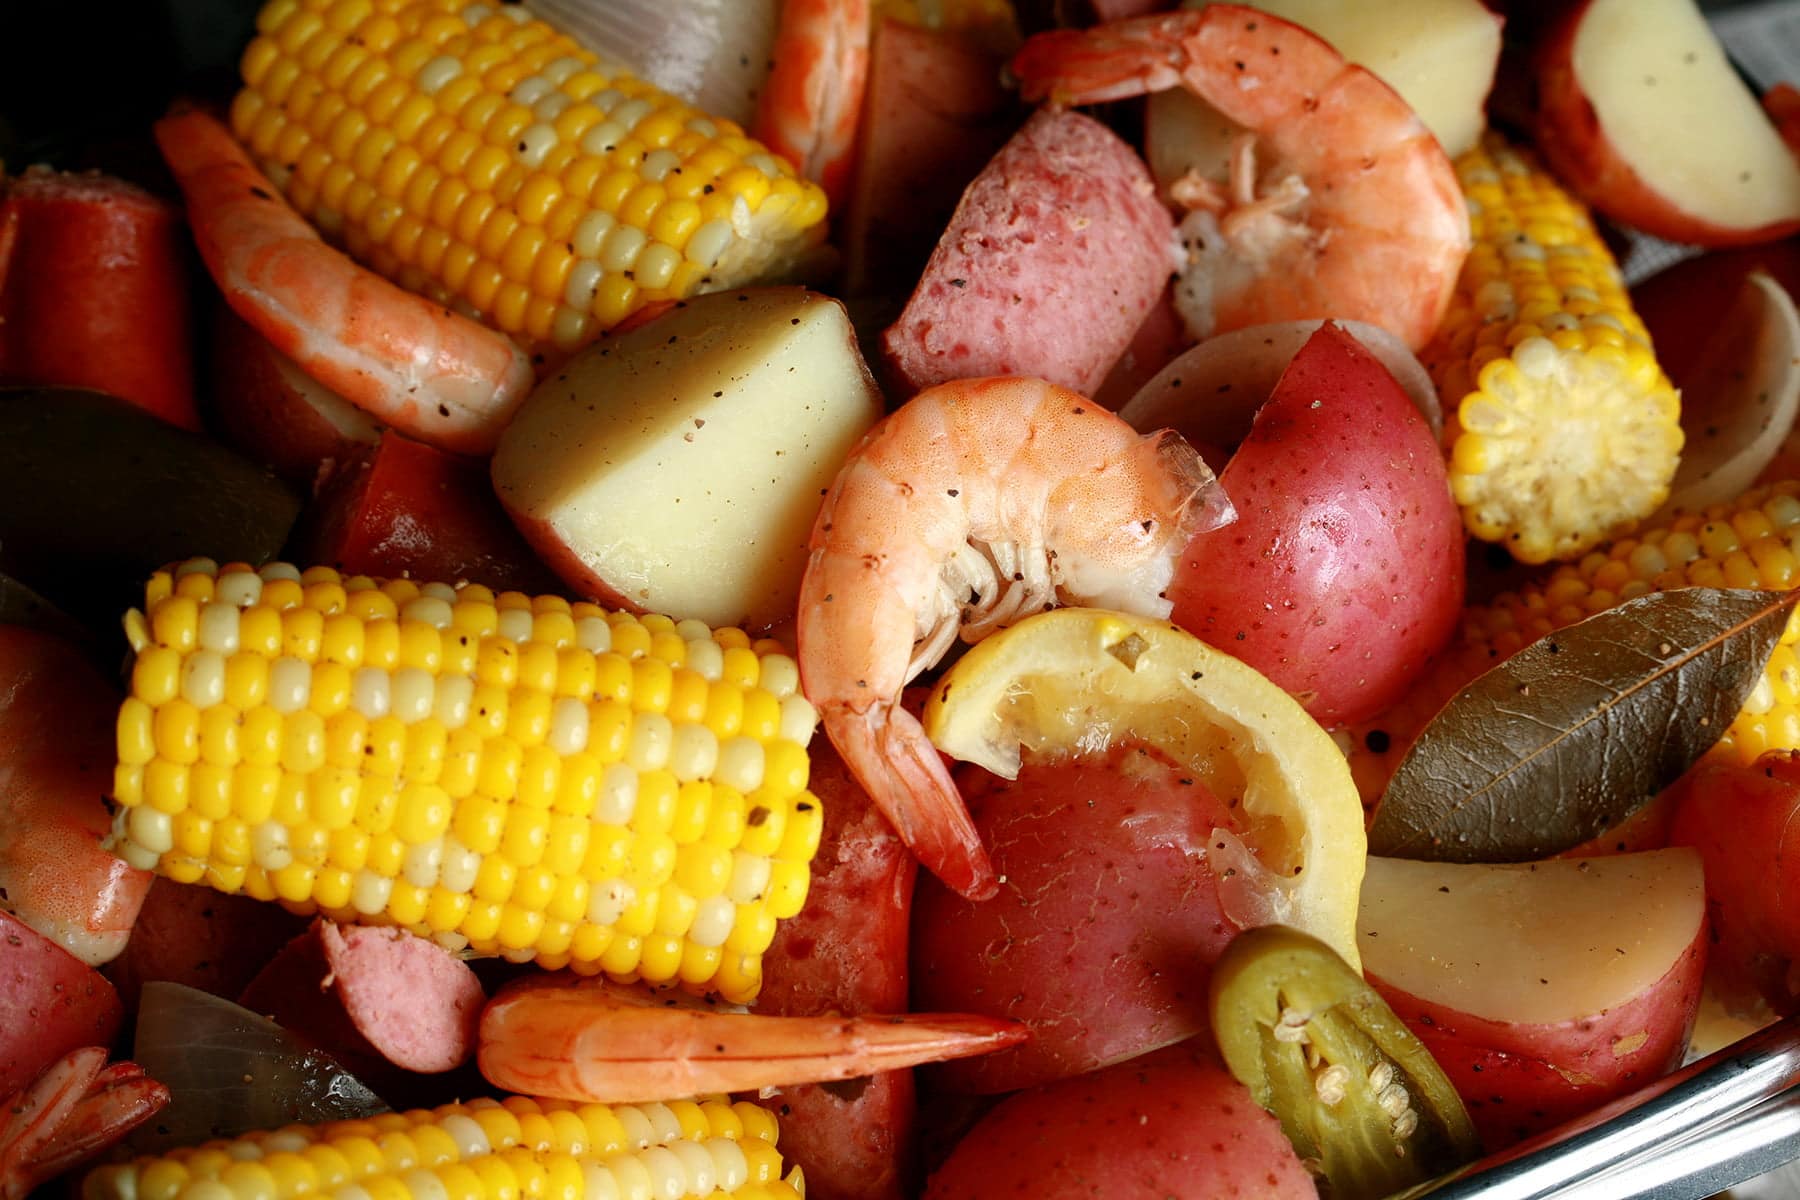 A close up view of a batch of frogmore stew: Red potatoes, corn on the cob, shrimp, and sausage.